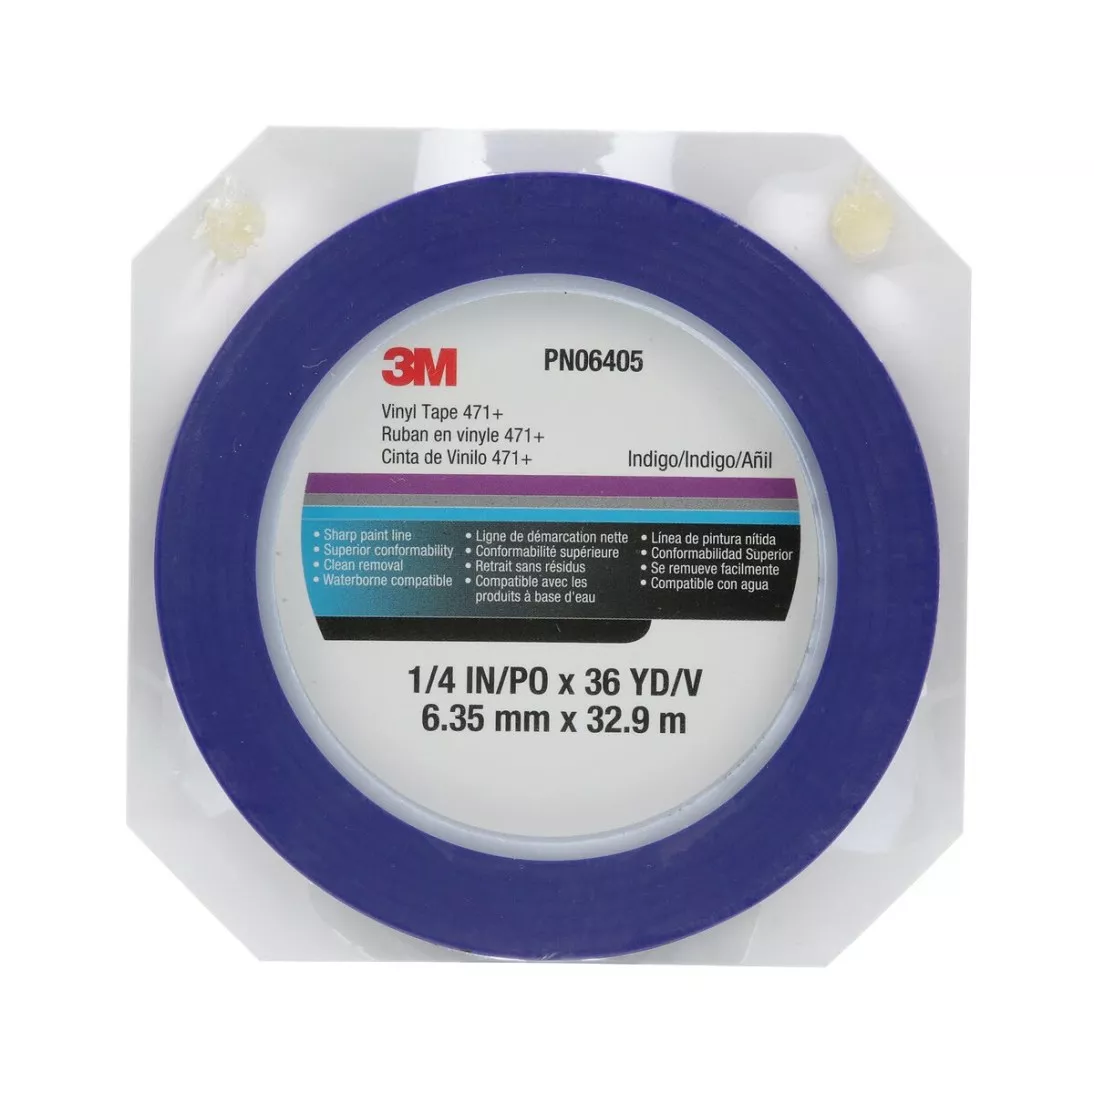 3M™ Vinyl Tape 471+, Indiago, 1/4 in x 36 yd, 5.3 mil, 144 rolls per
case, PN6405, Individually Wrapped Conveniently Packaged